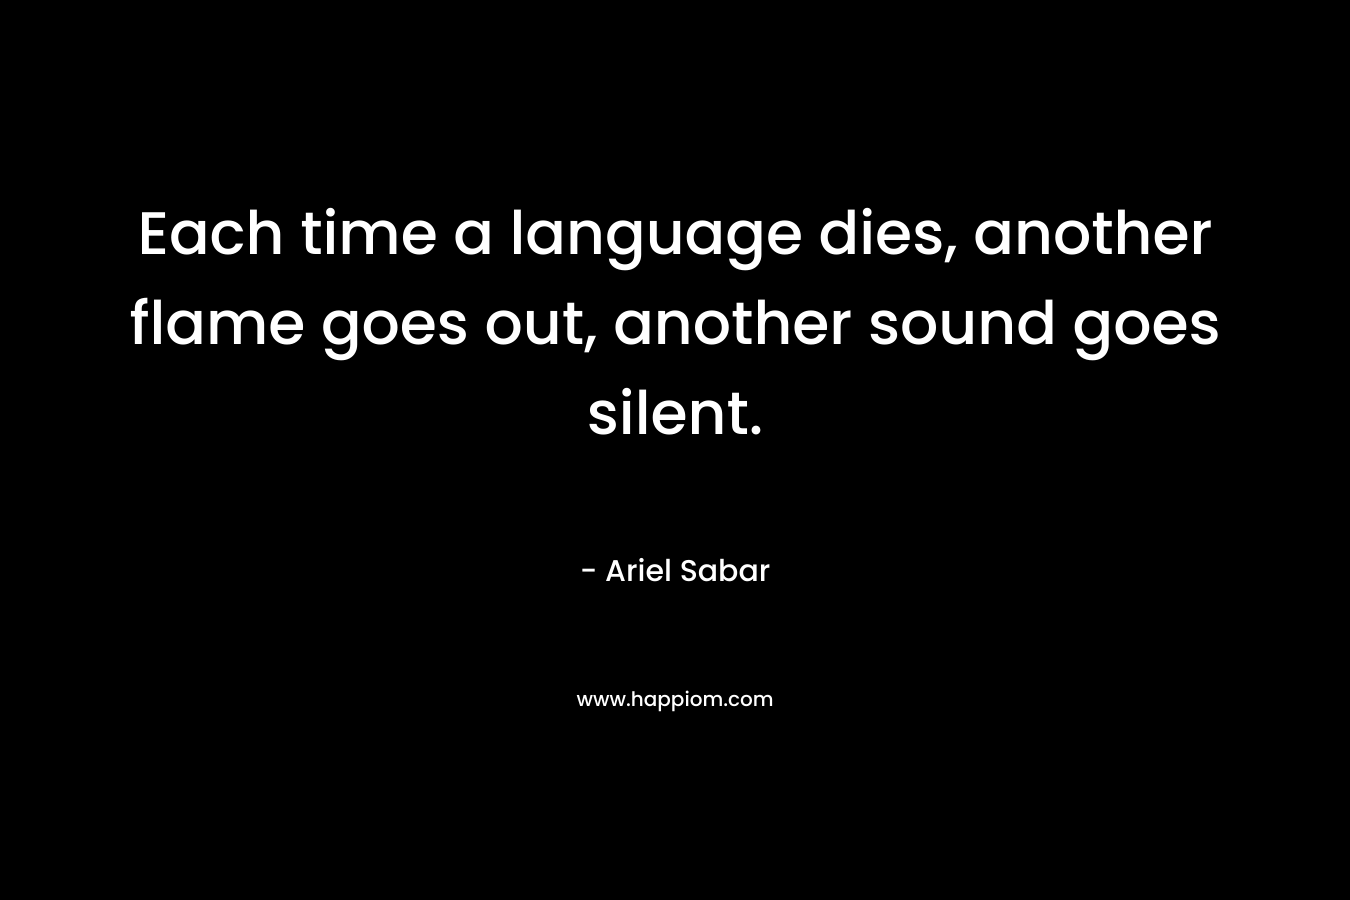 Each time a language dies, another flame goes out, another sound goes silent.